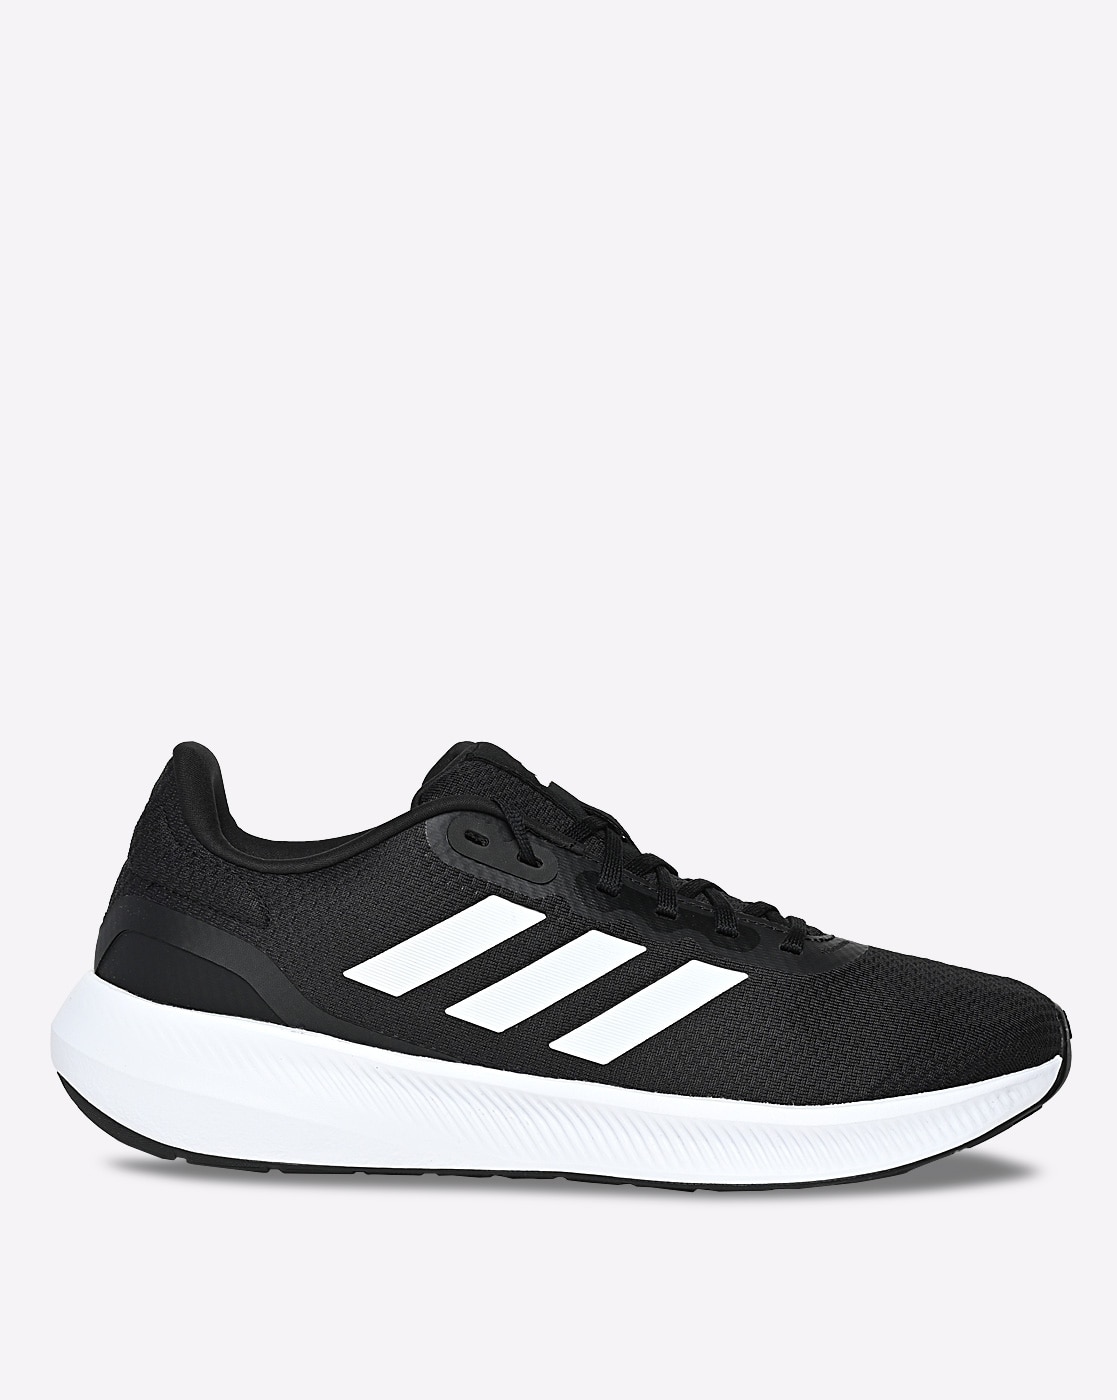 Buy Black Sports Men Online for by ADIDAS Shoes